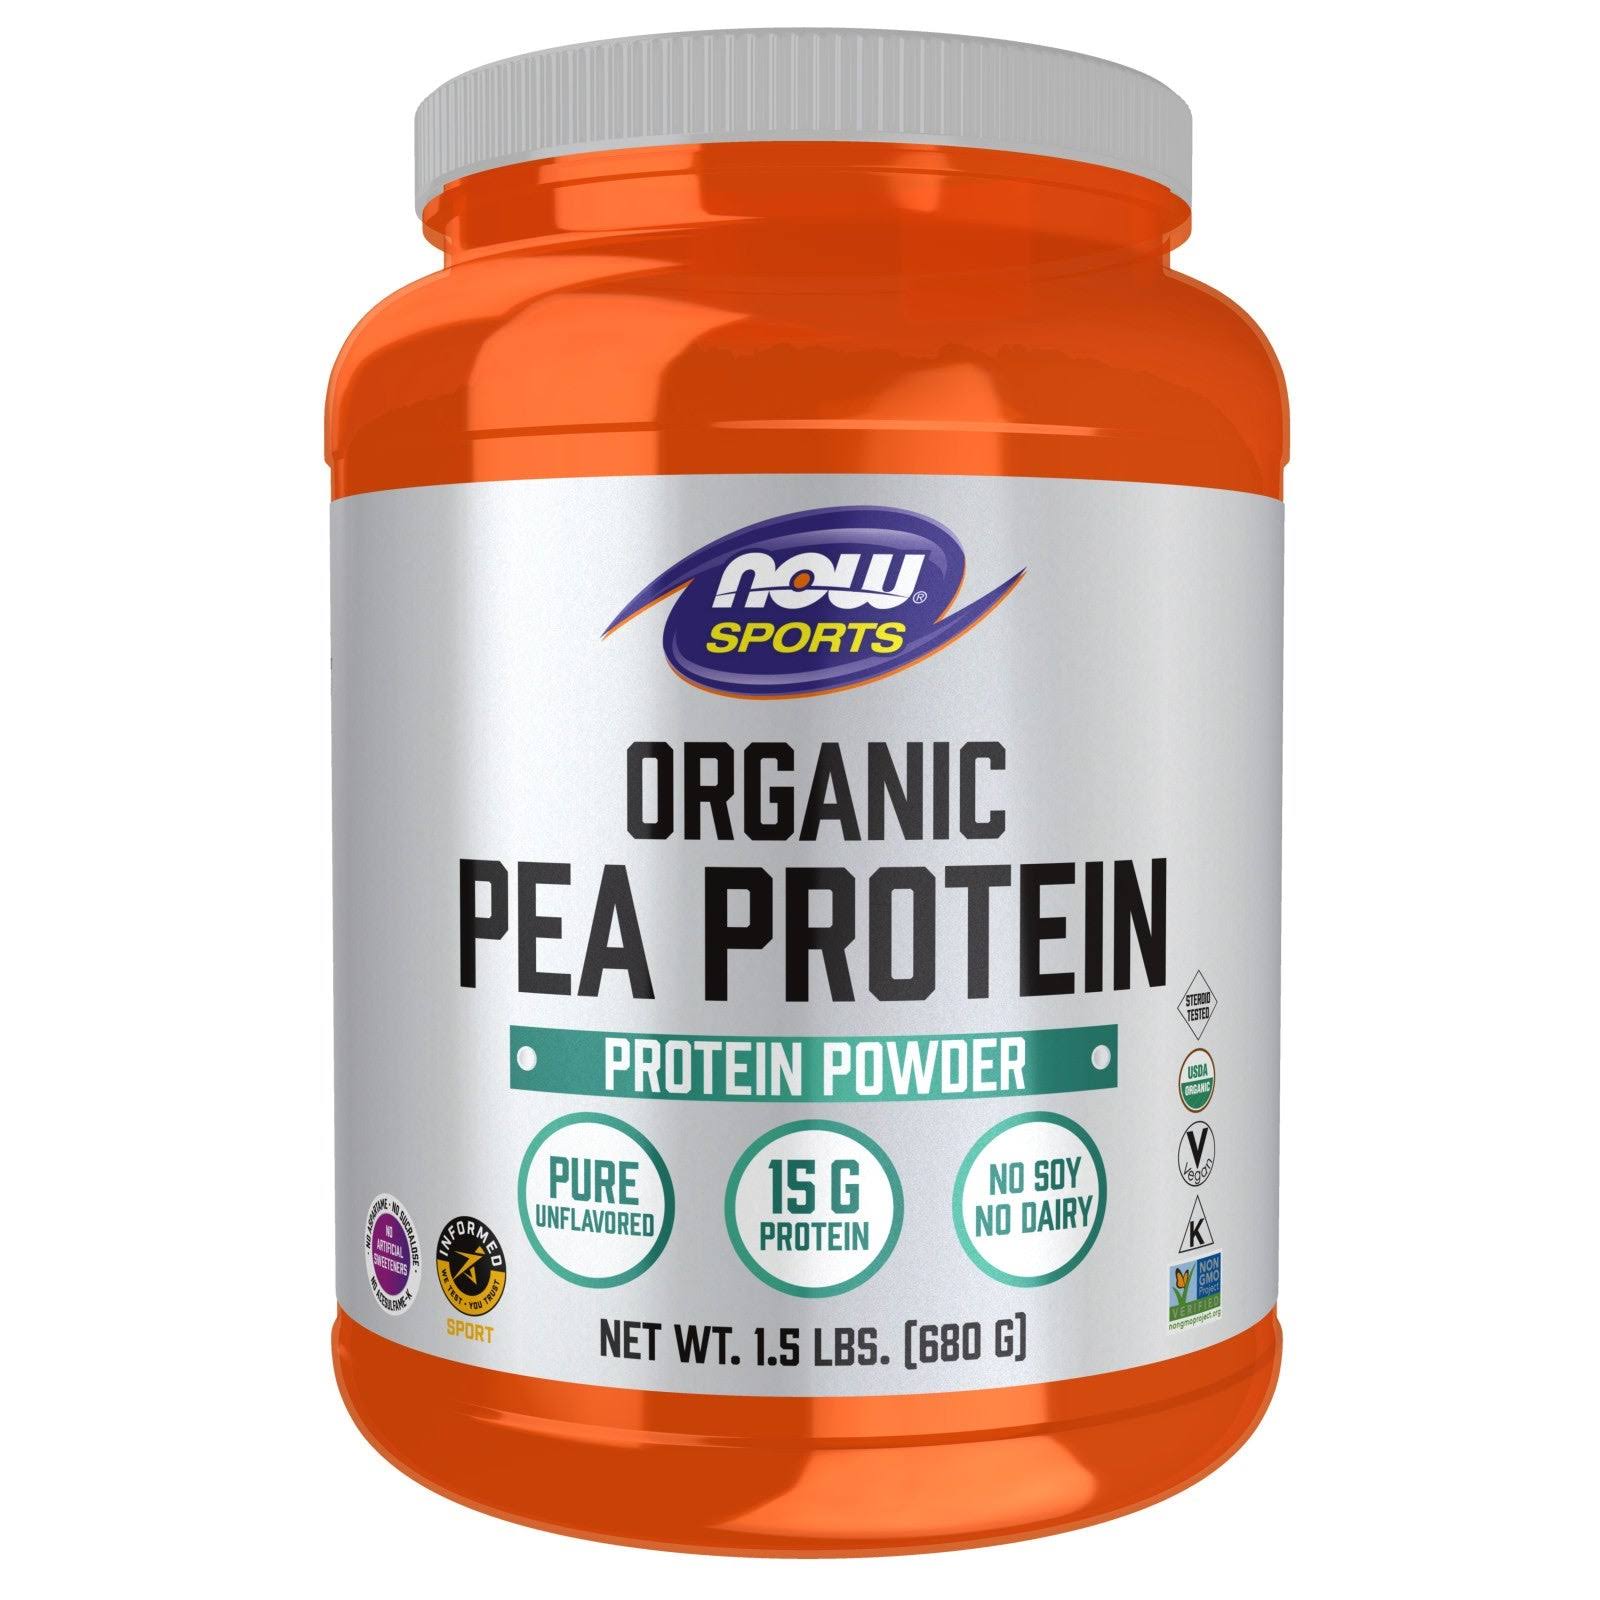 Now Foods Organic Pea Protein Powder - 680g